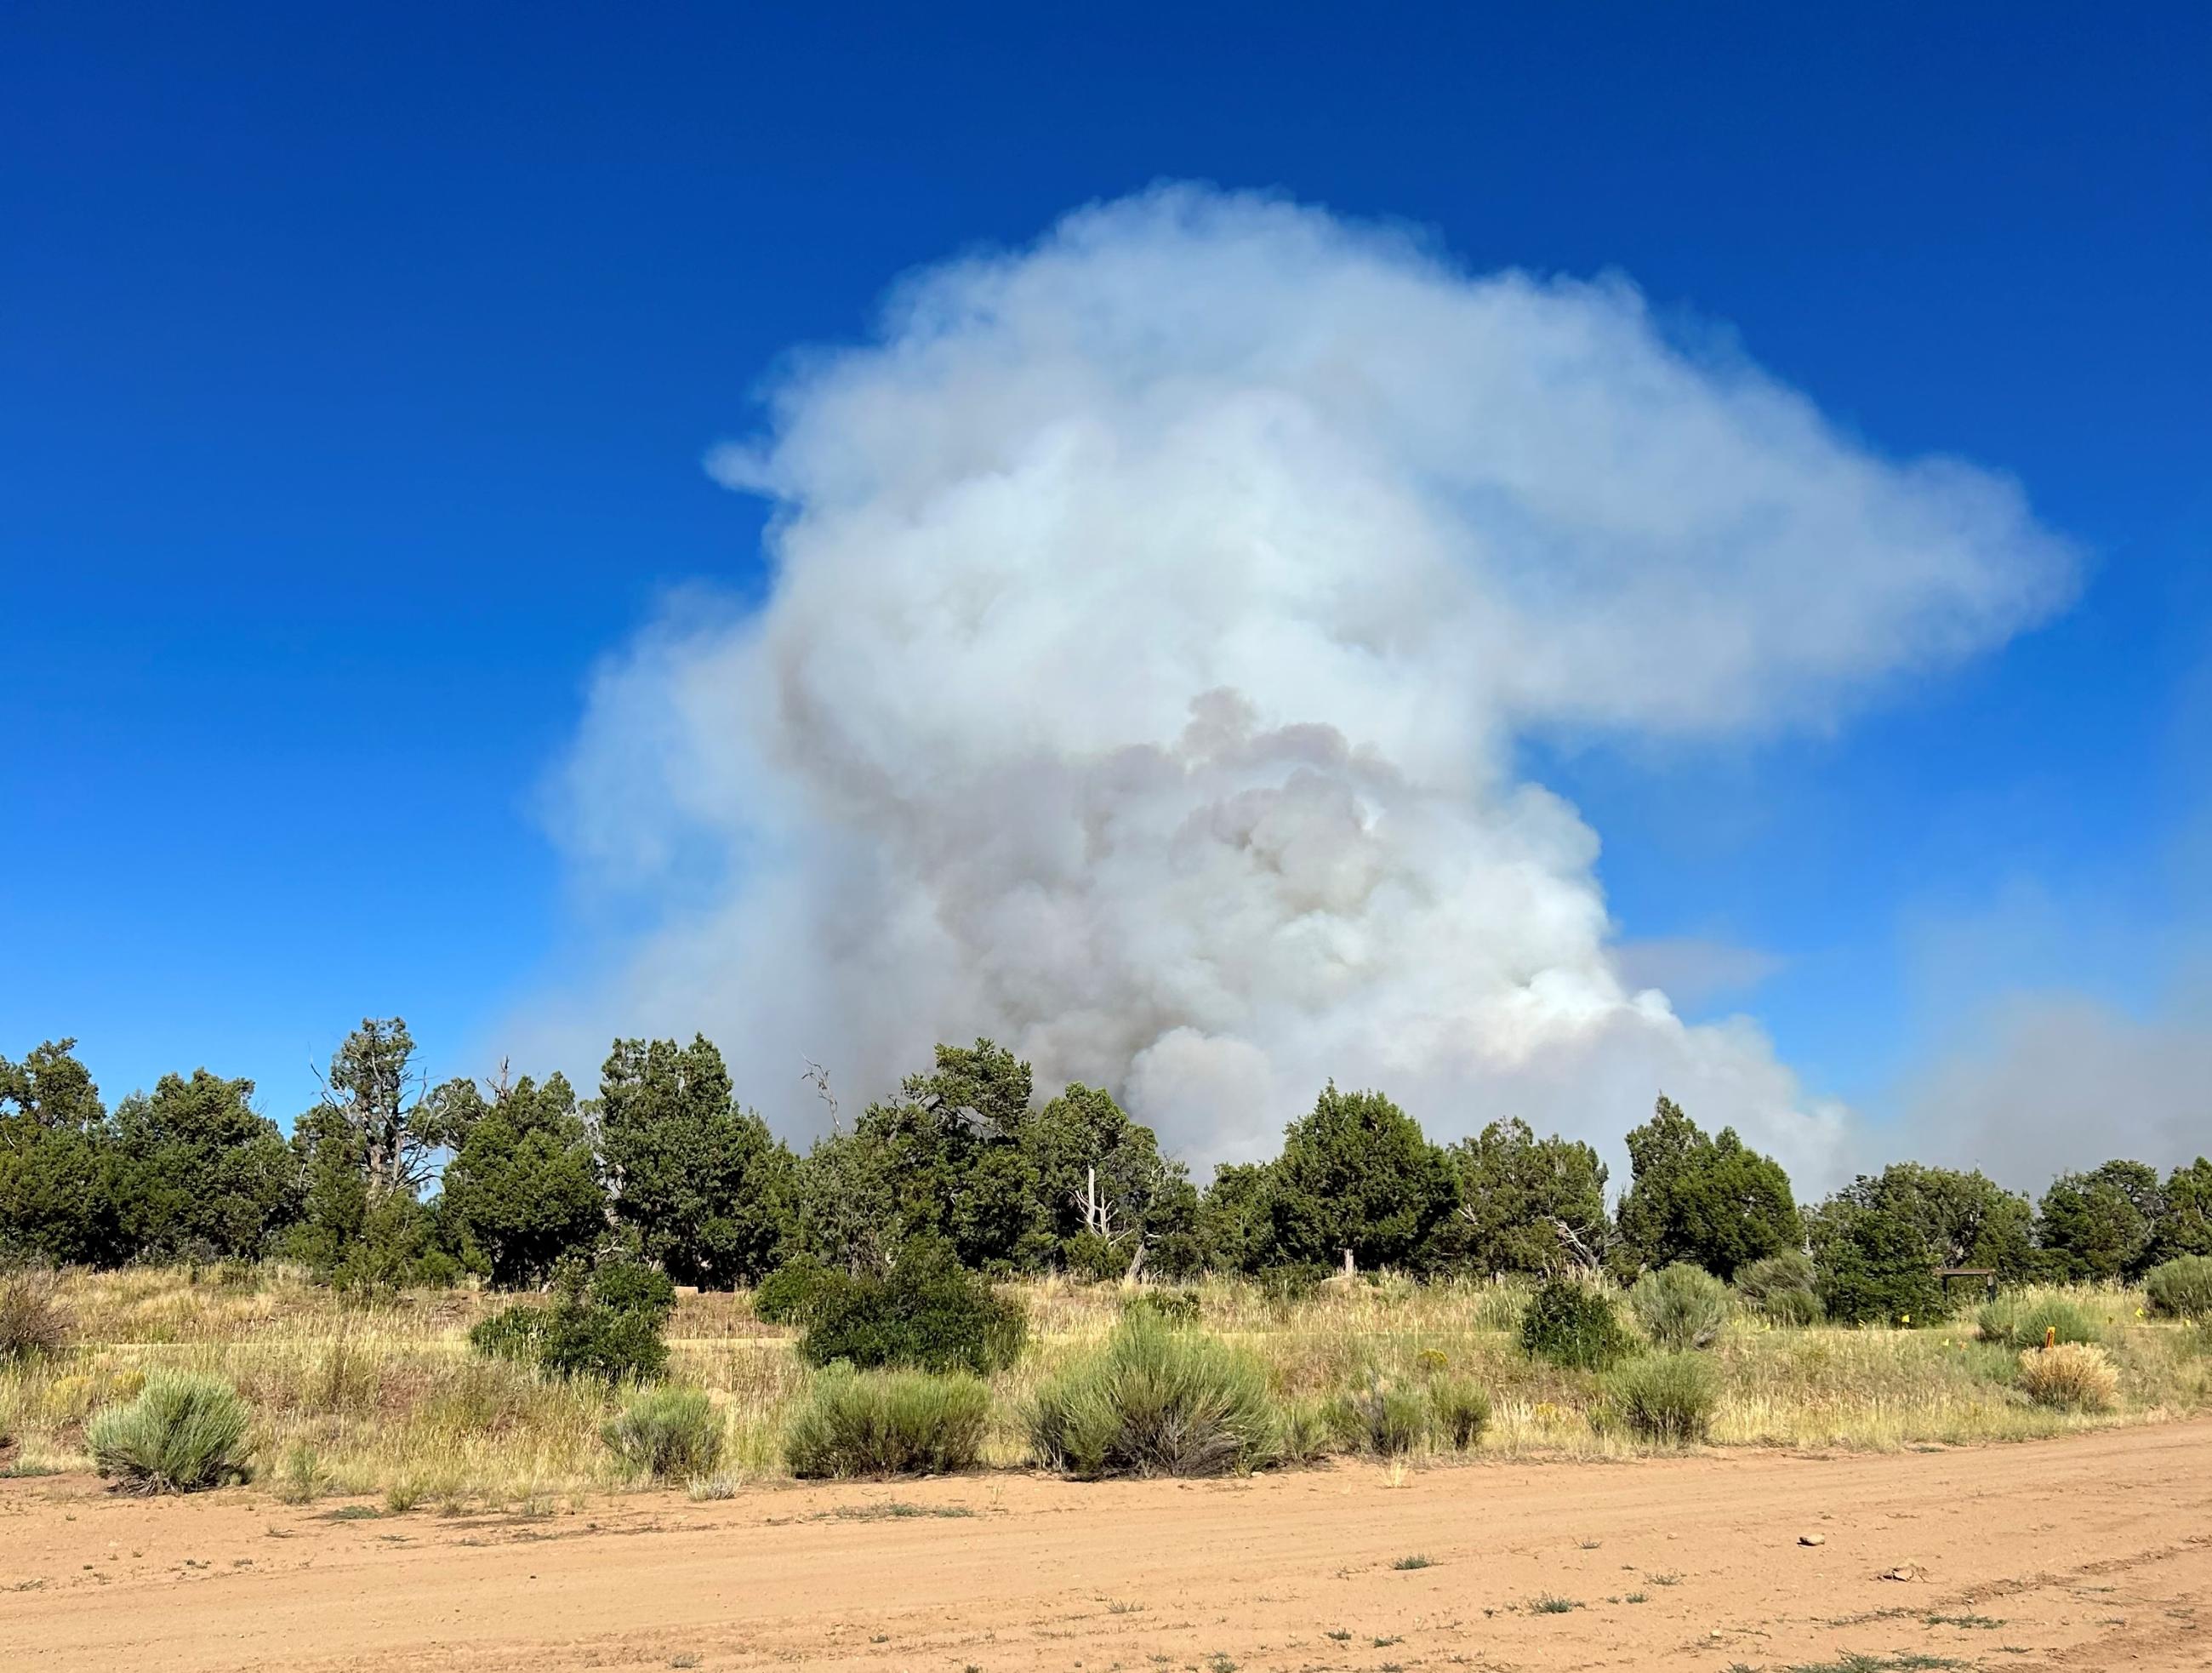 A smoke plume rises from a pinon-juniper forested area